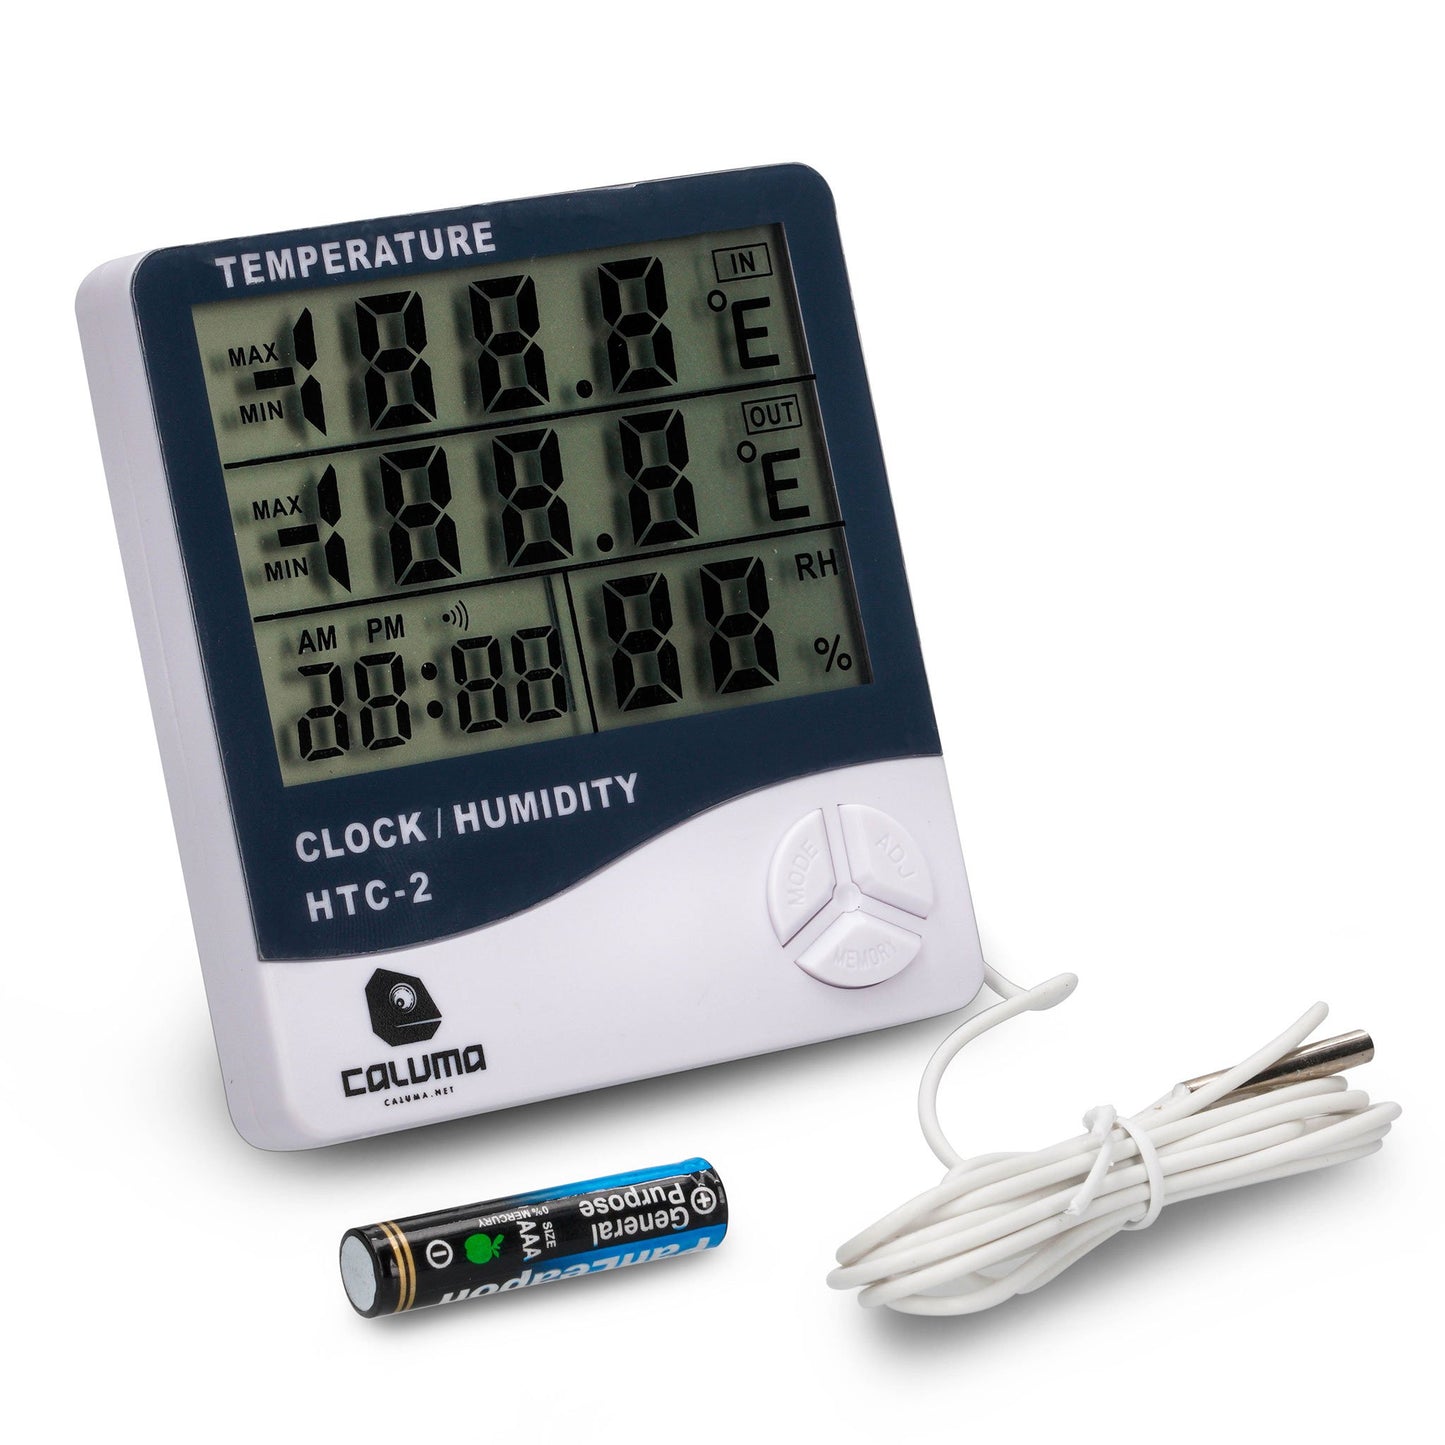 Thermo- & Hygrometer